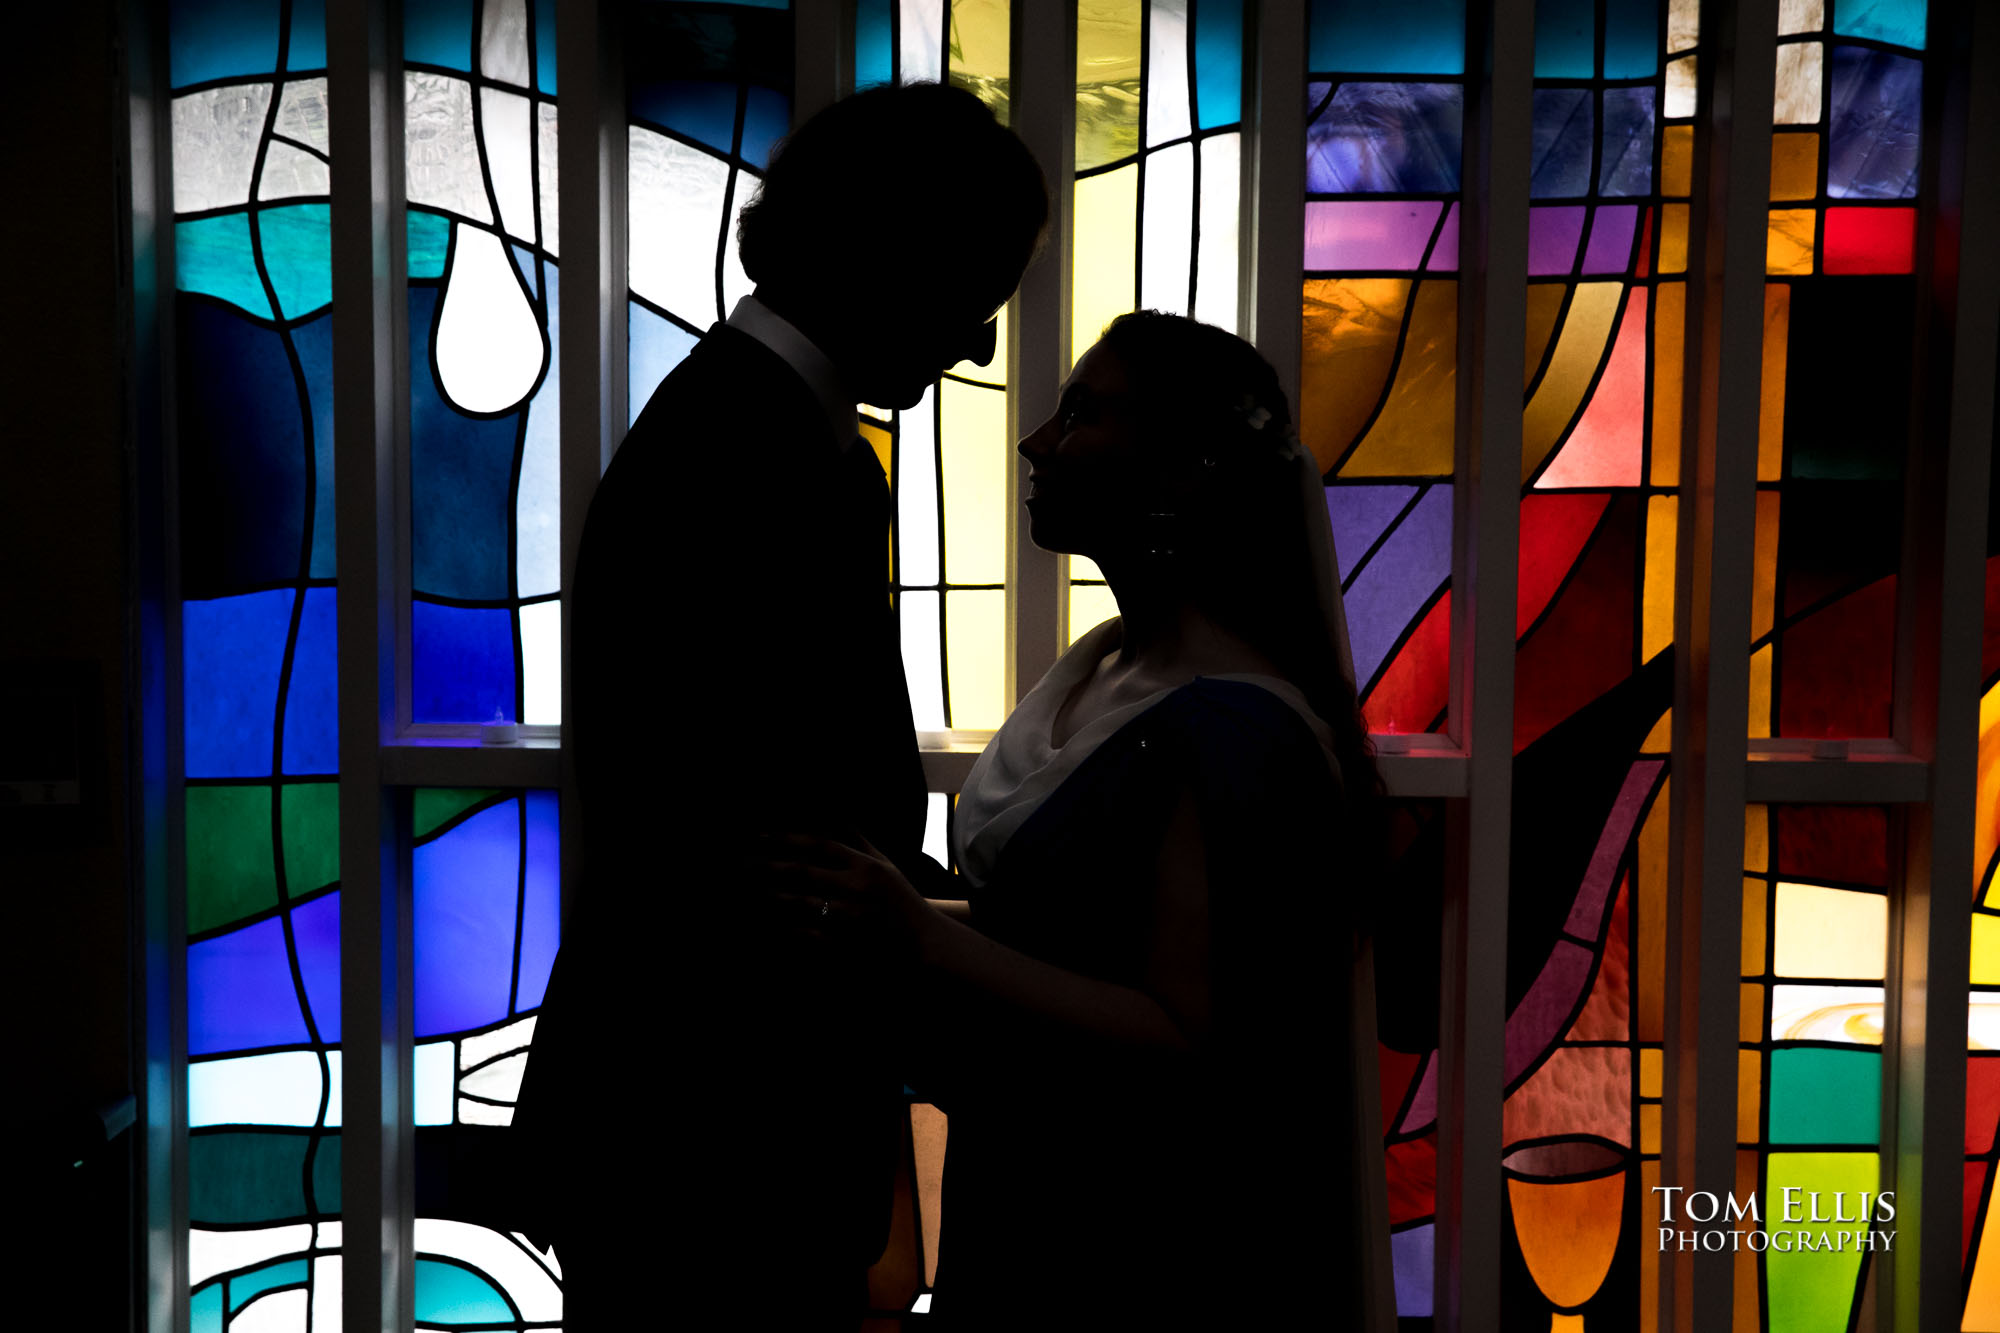 Bride Dorothy Ann and groom Mathew in silhouette against the stain glass window before their wedding ceremony at Maple Leaf Lutheran Church. Tom Ellis Photography, Seattle wedding photographer